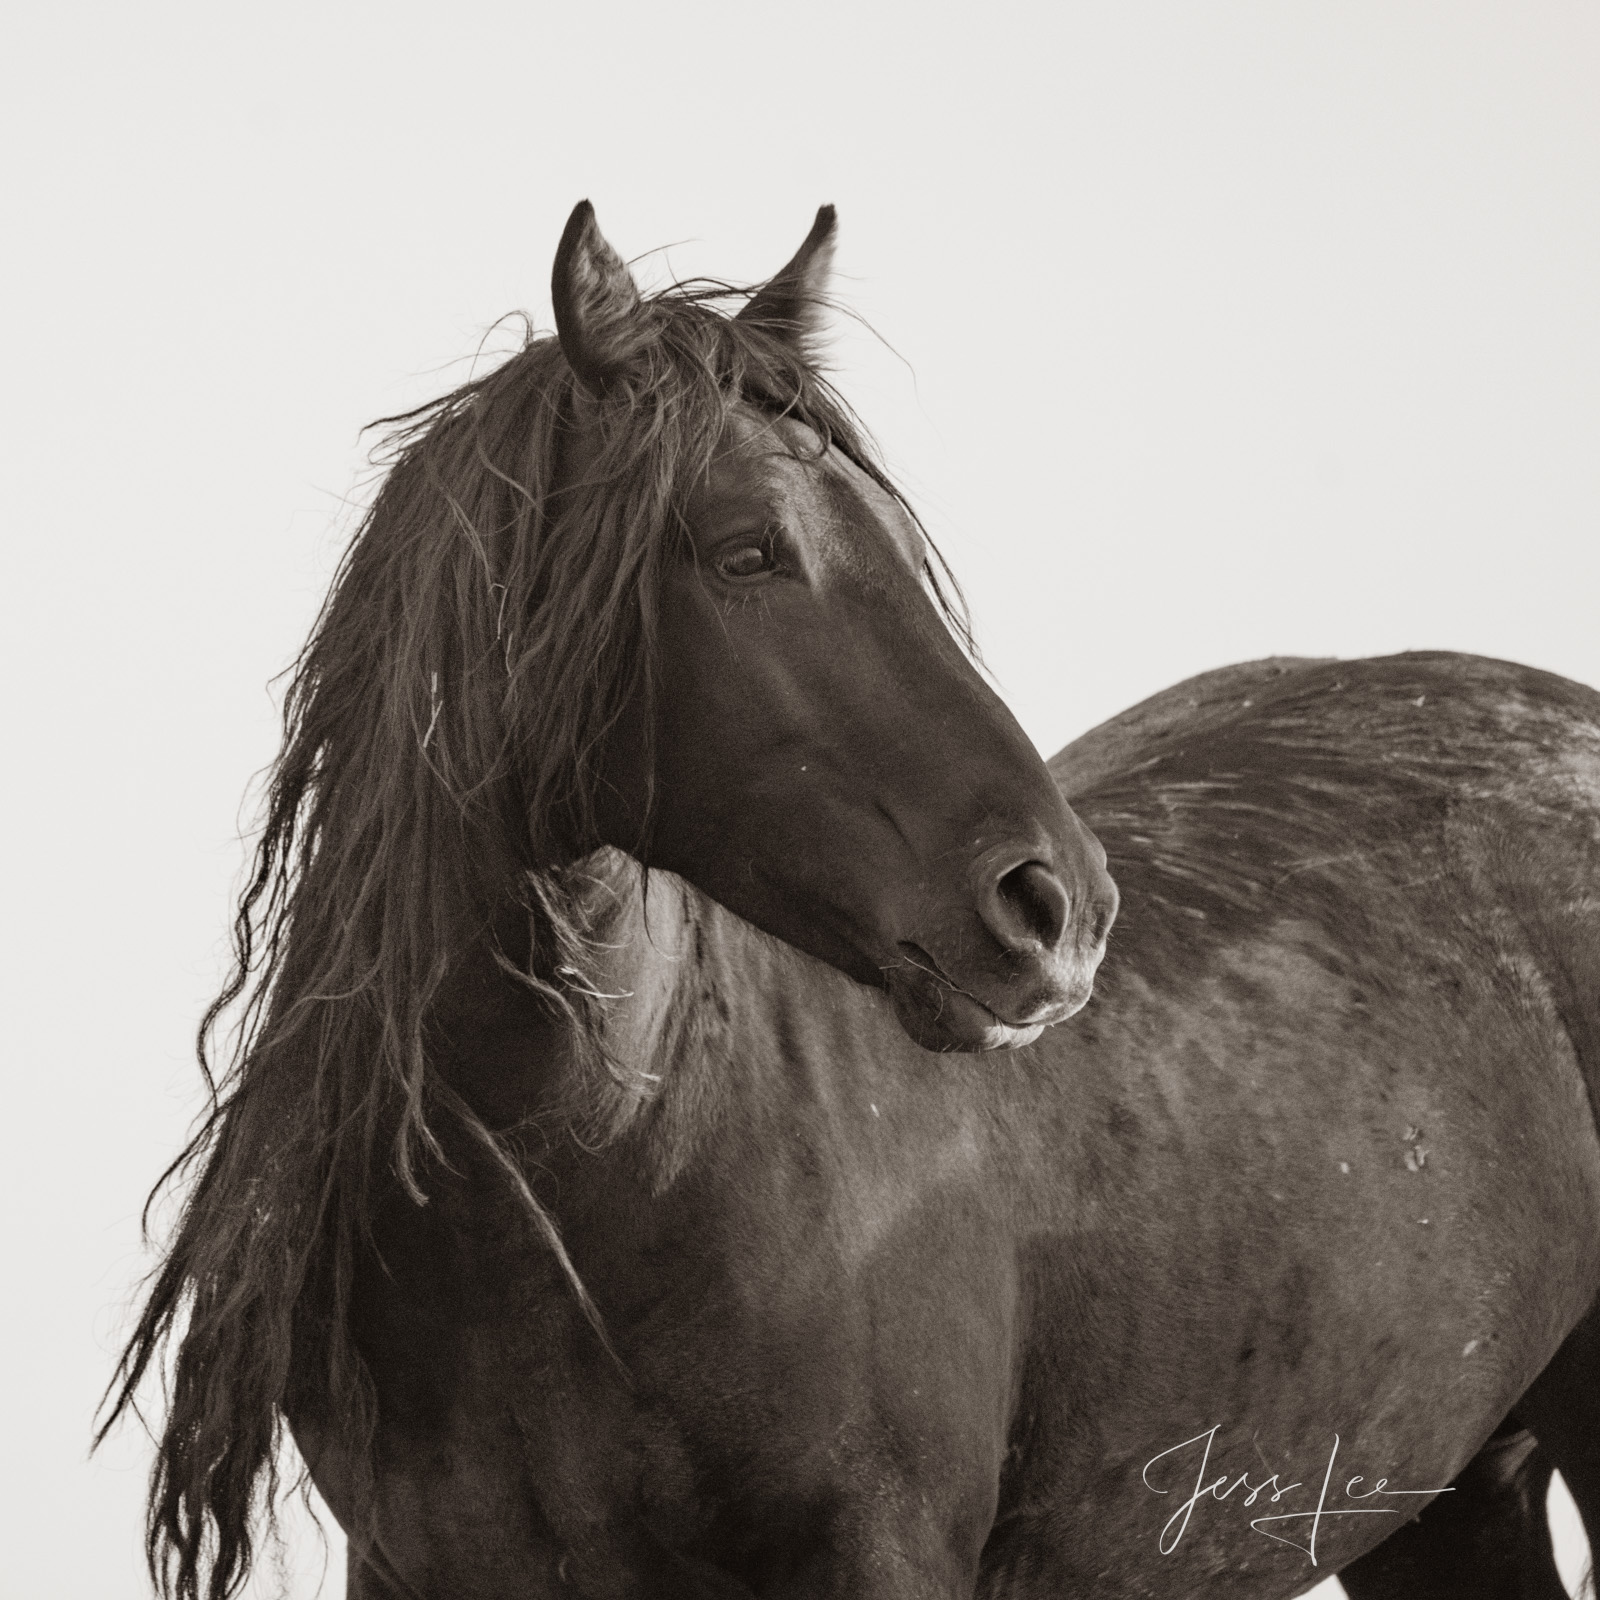 Wild Horse black and white Horse Photo in a Fine Art Limited Edition Photography Print for Luxury homes.